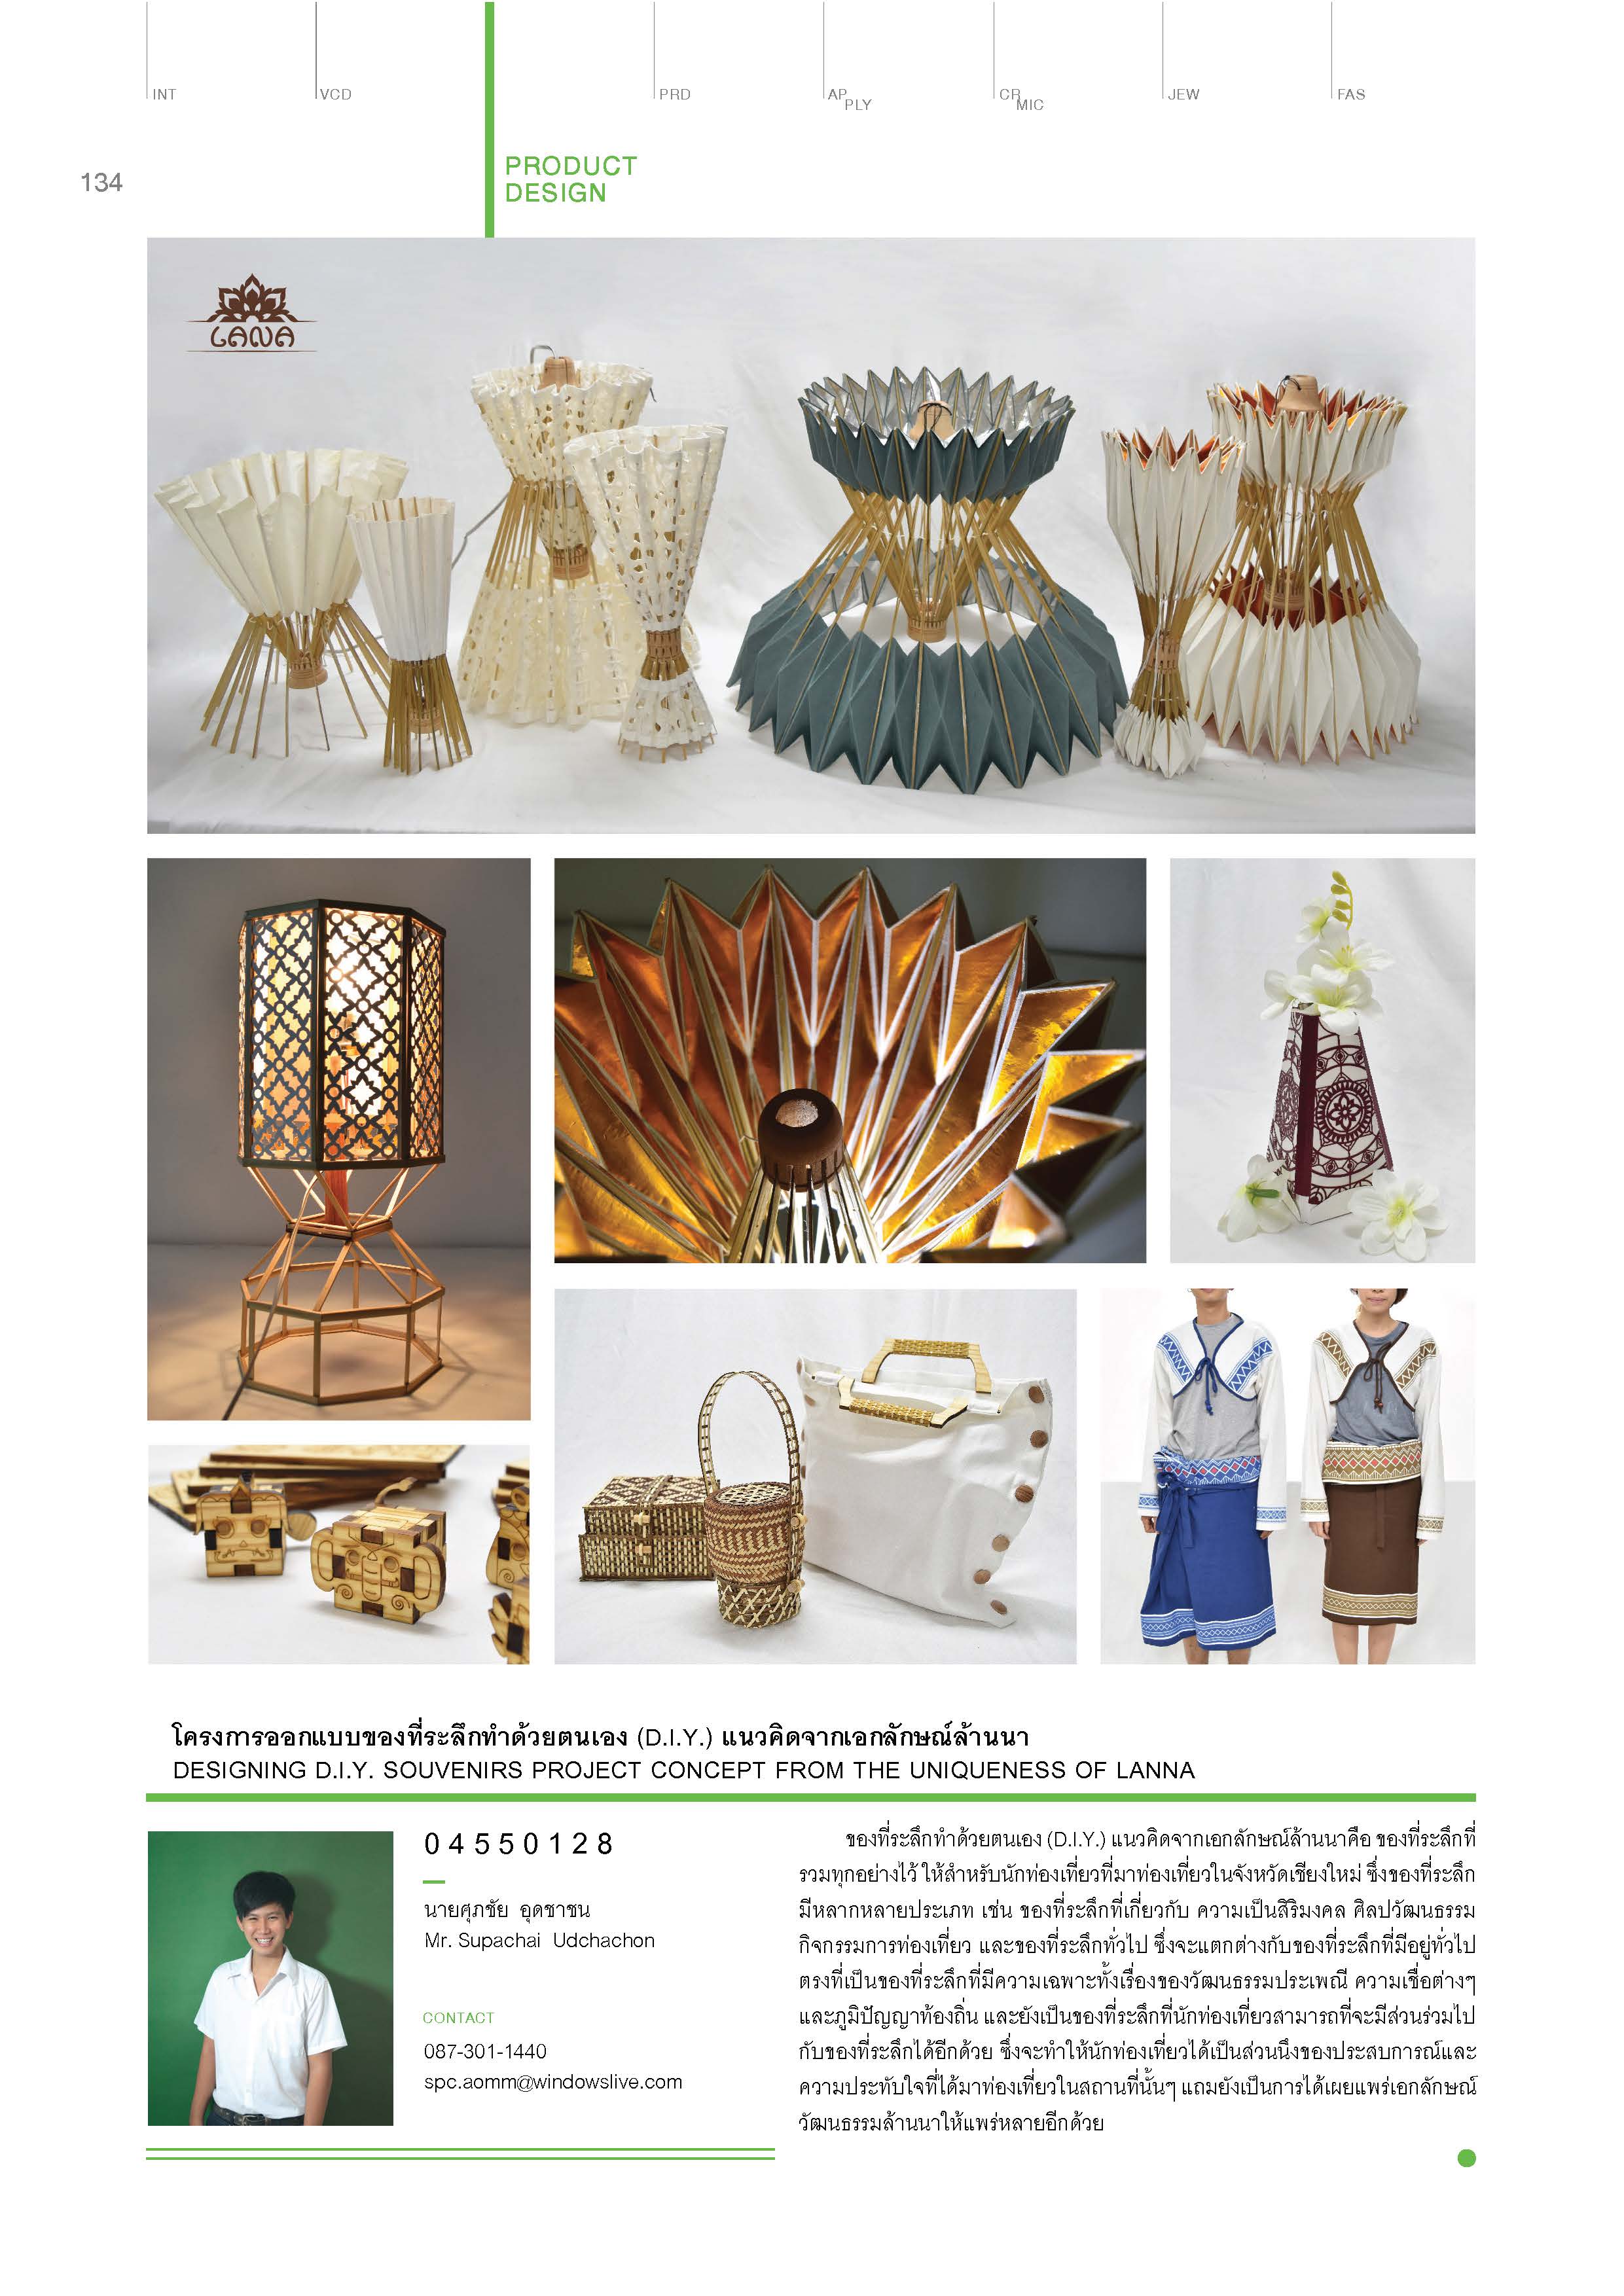 Photosynthesis-The46th_Art_Thesis_Exhibition_Decorative_Arts_Page_154